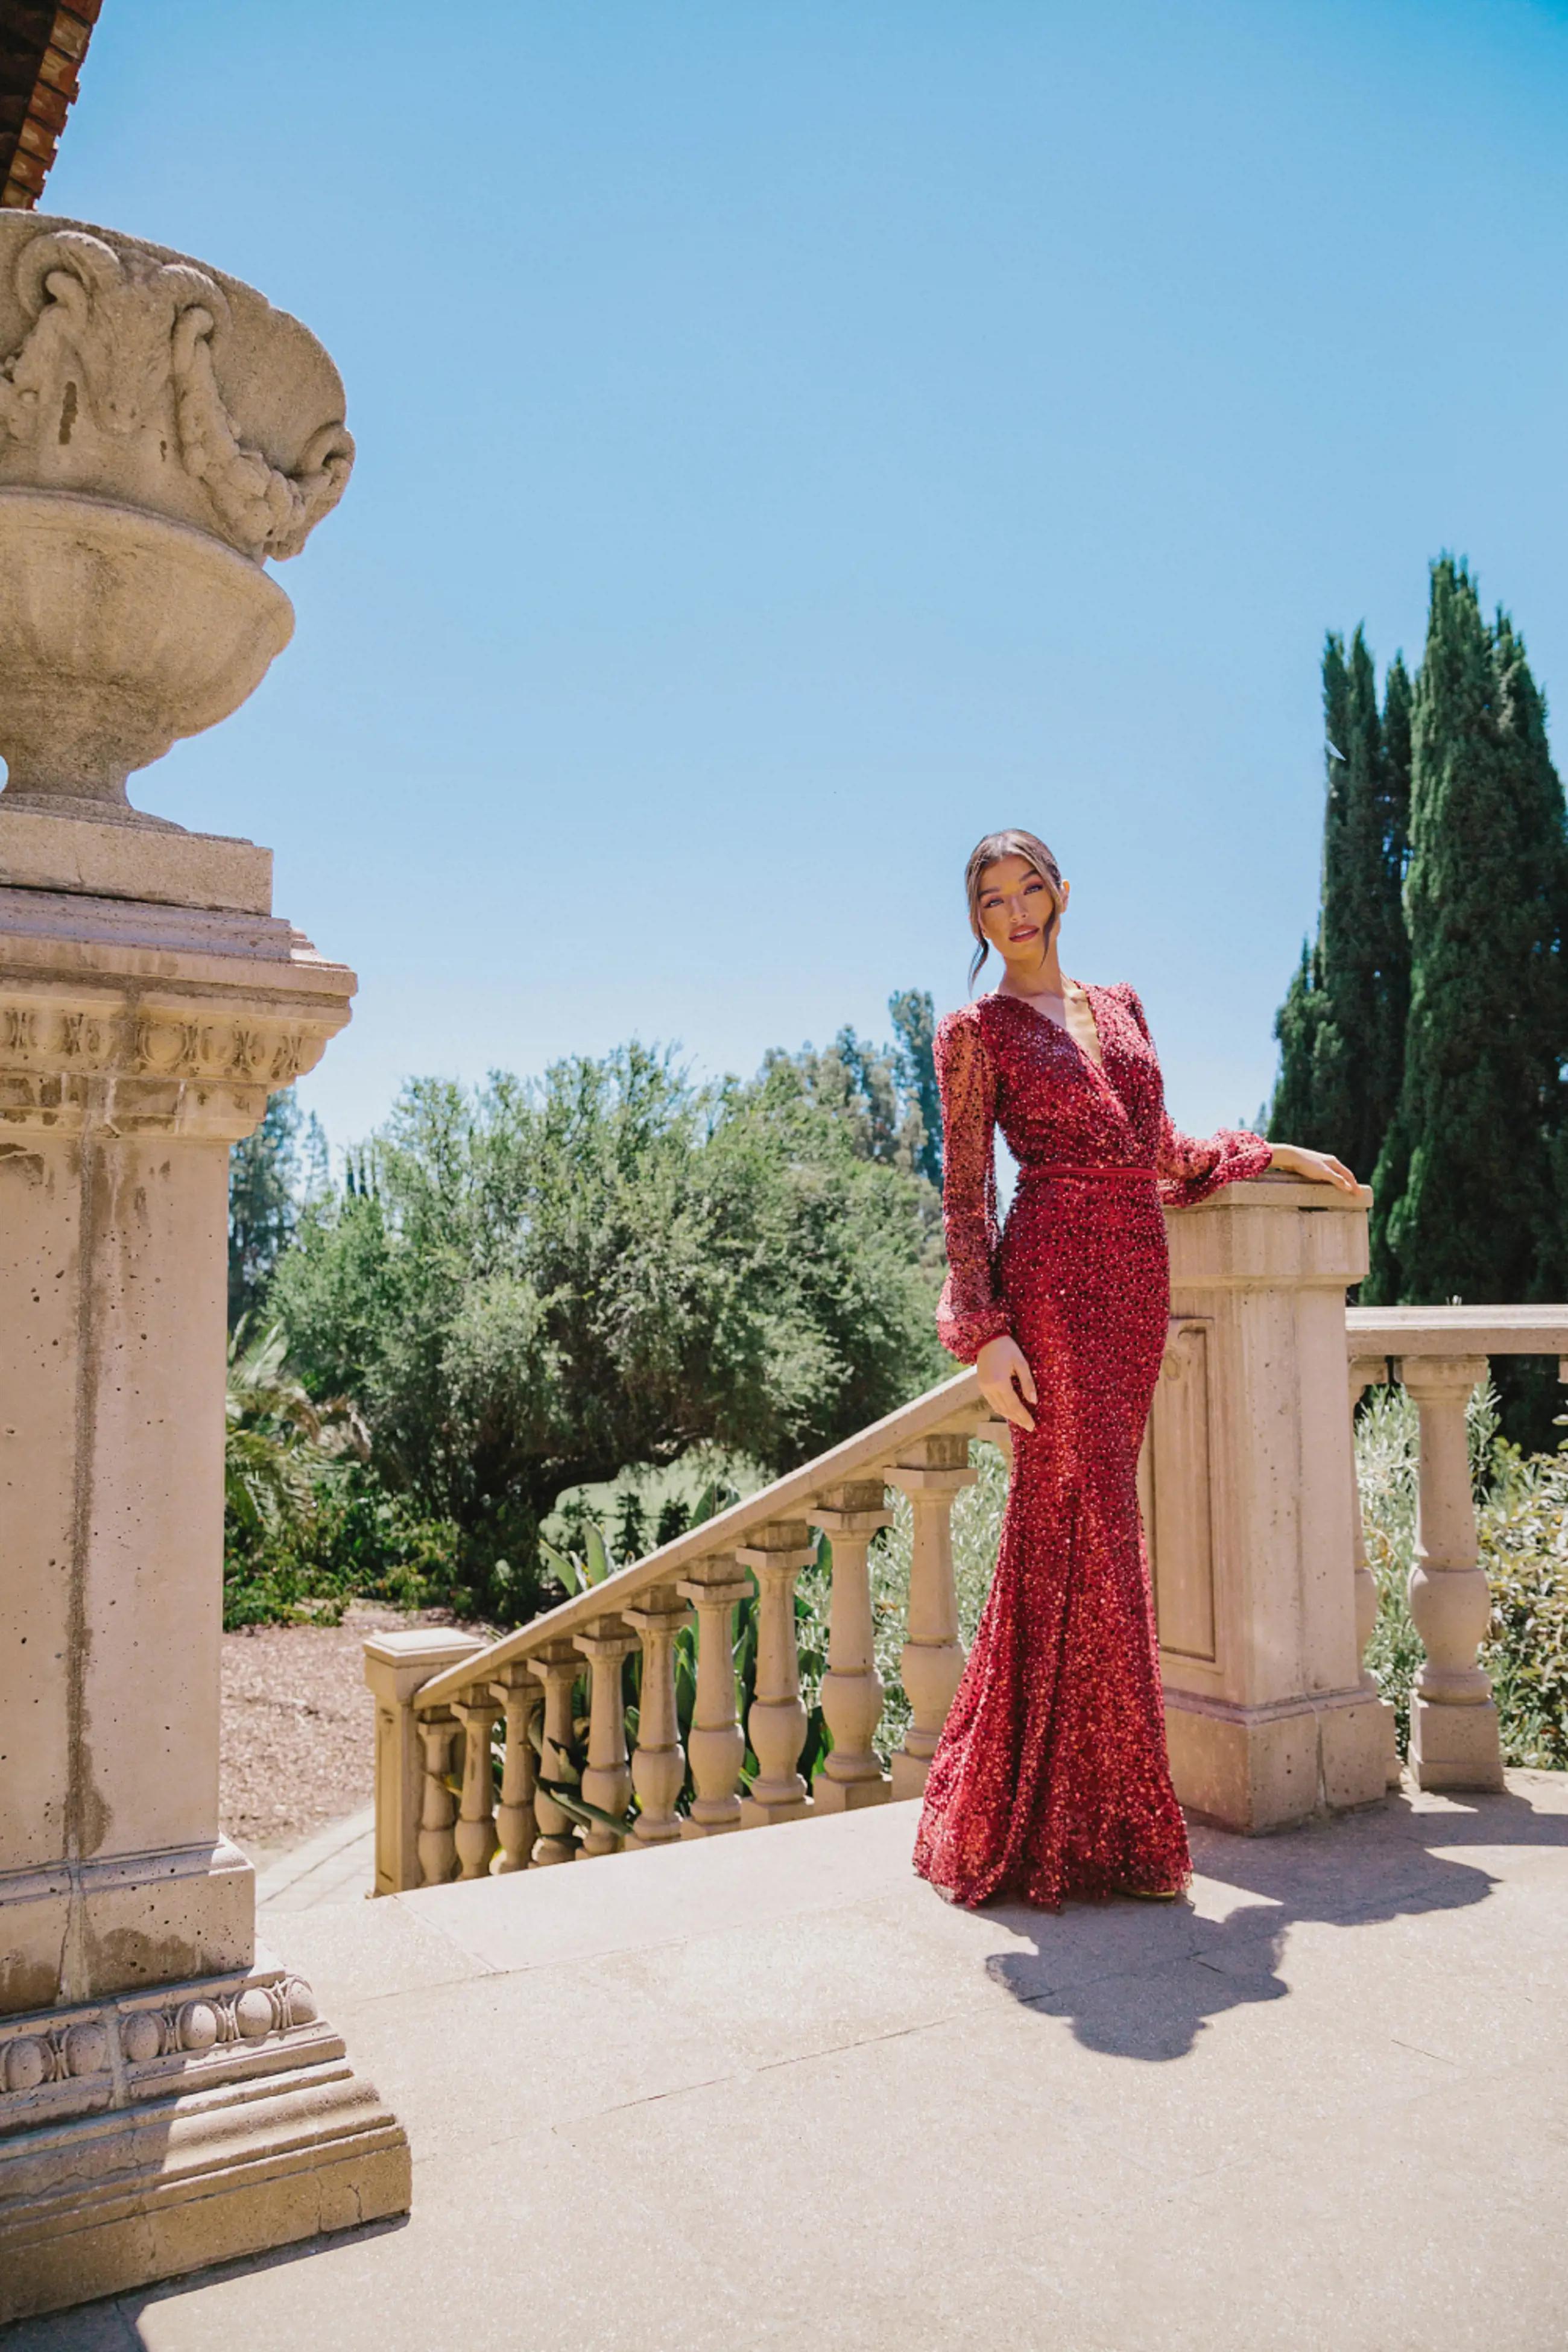 Model wearing a red long evening gown